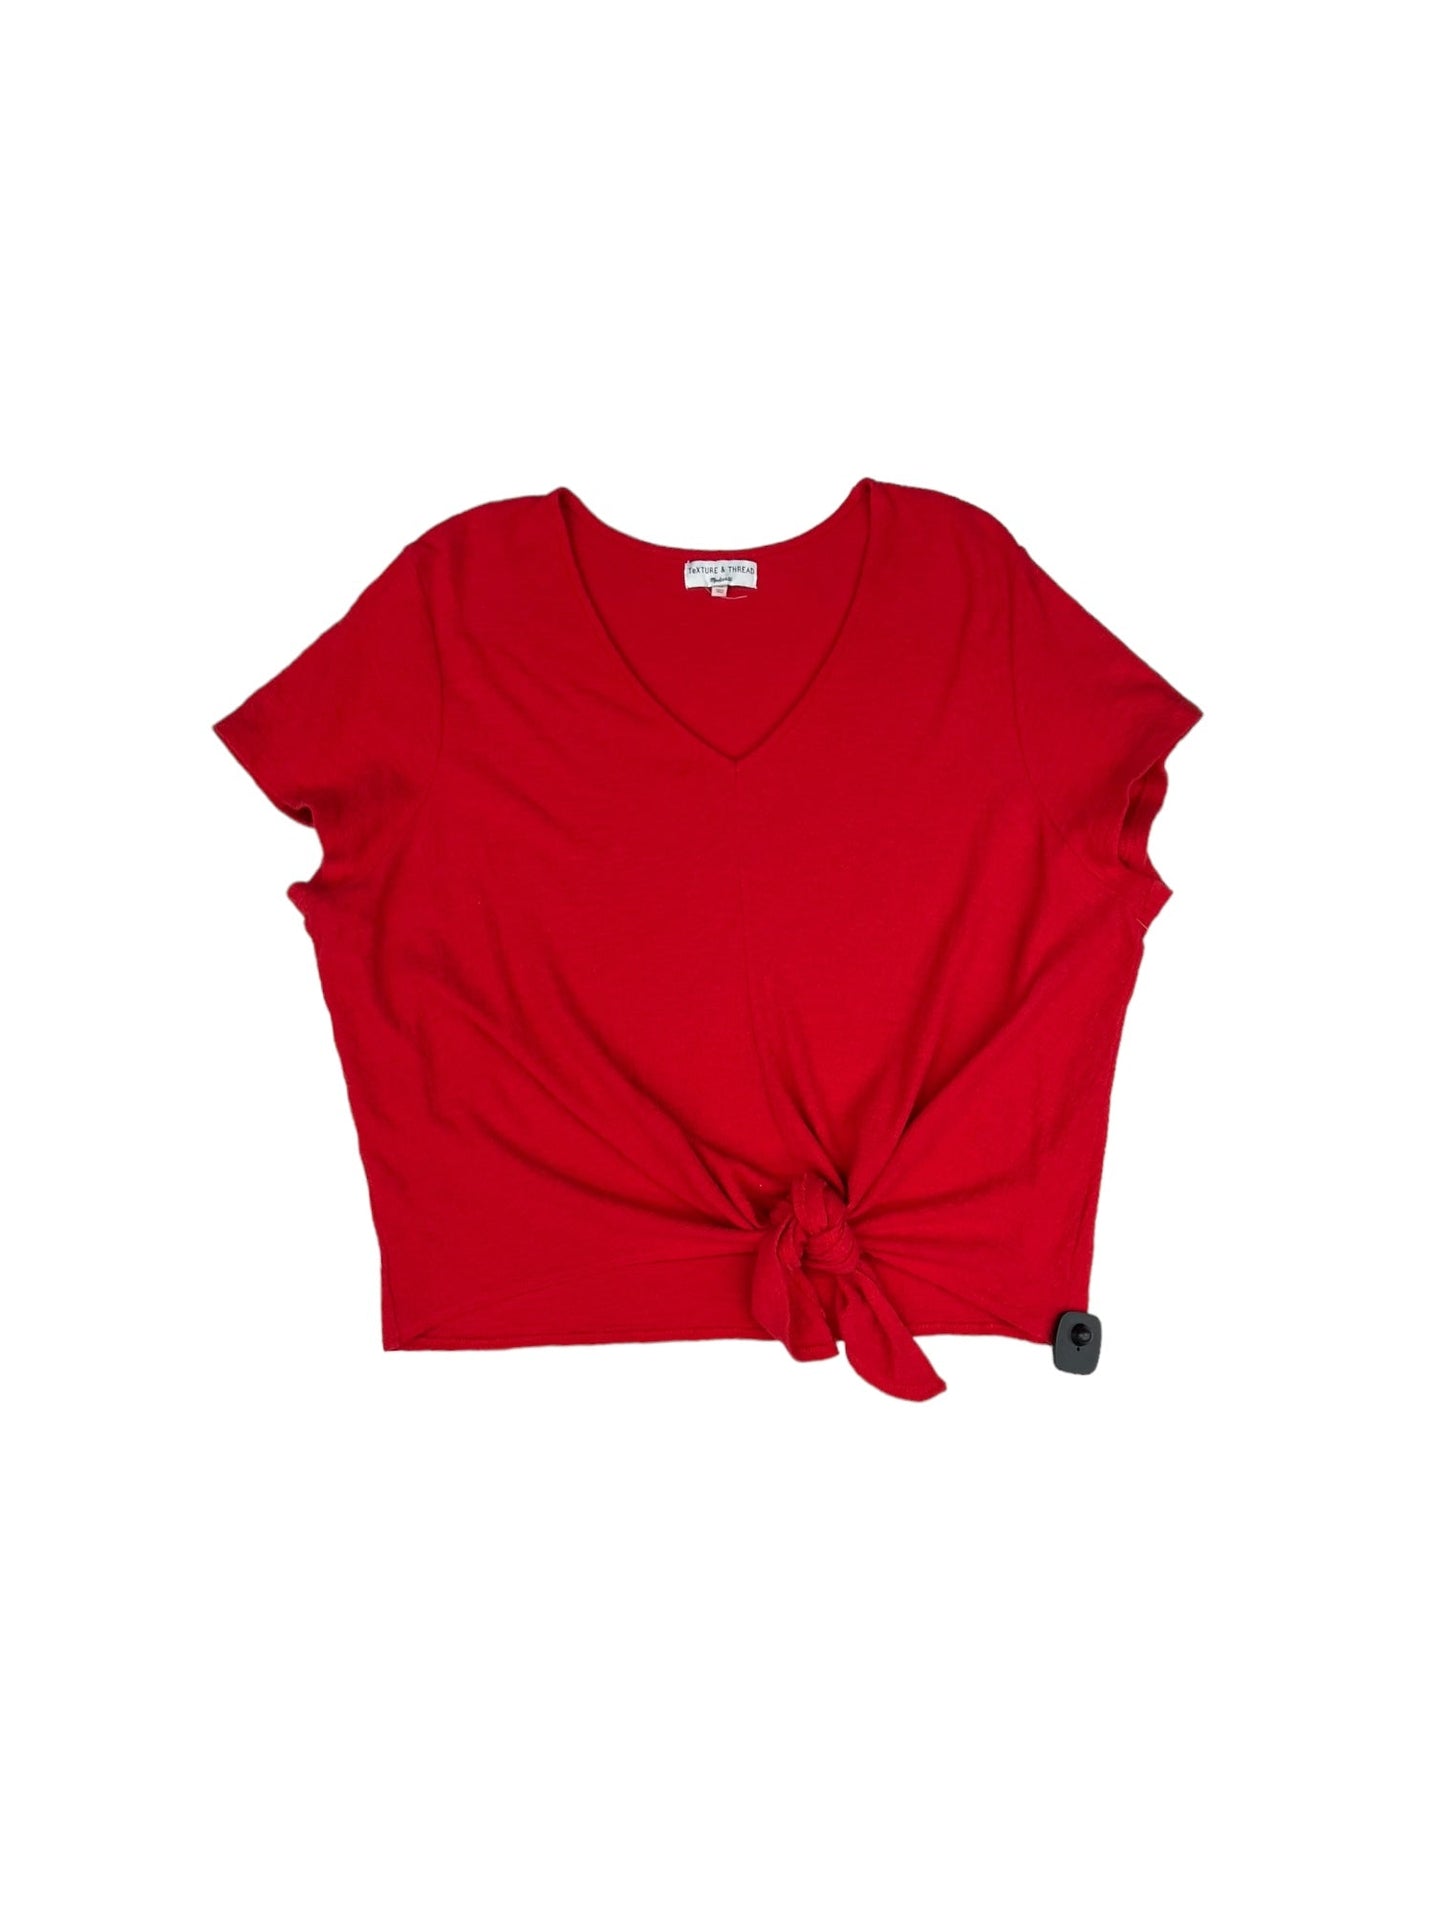 Red Top Short Sleeve Madewell, Size 3x